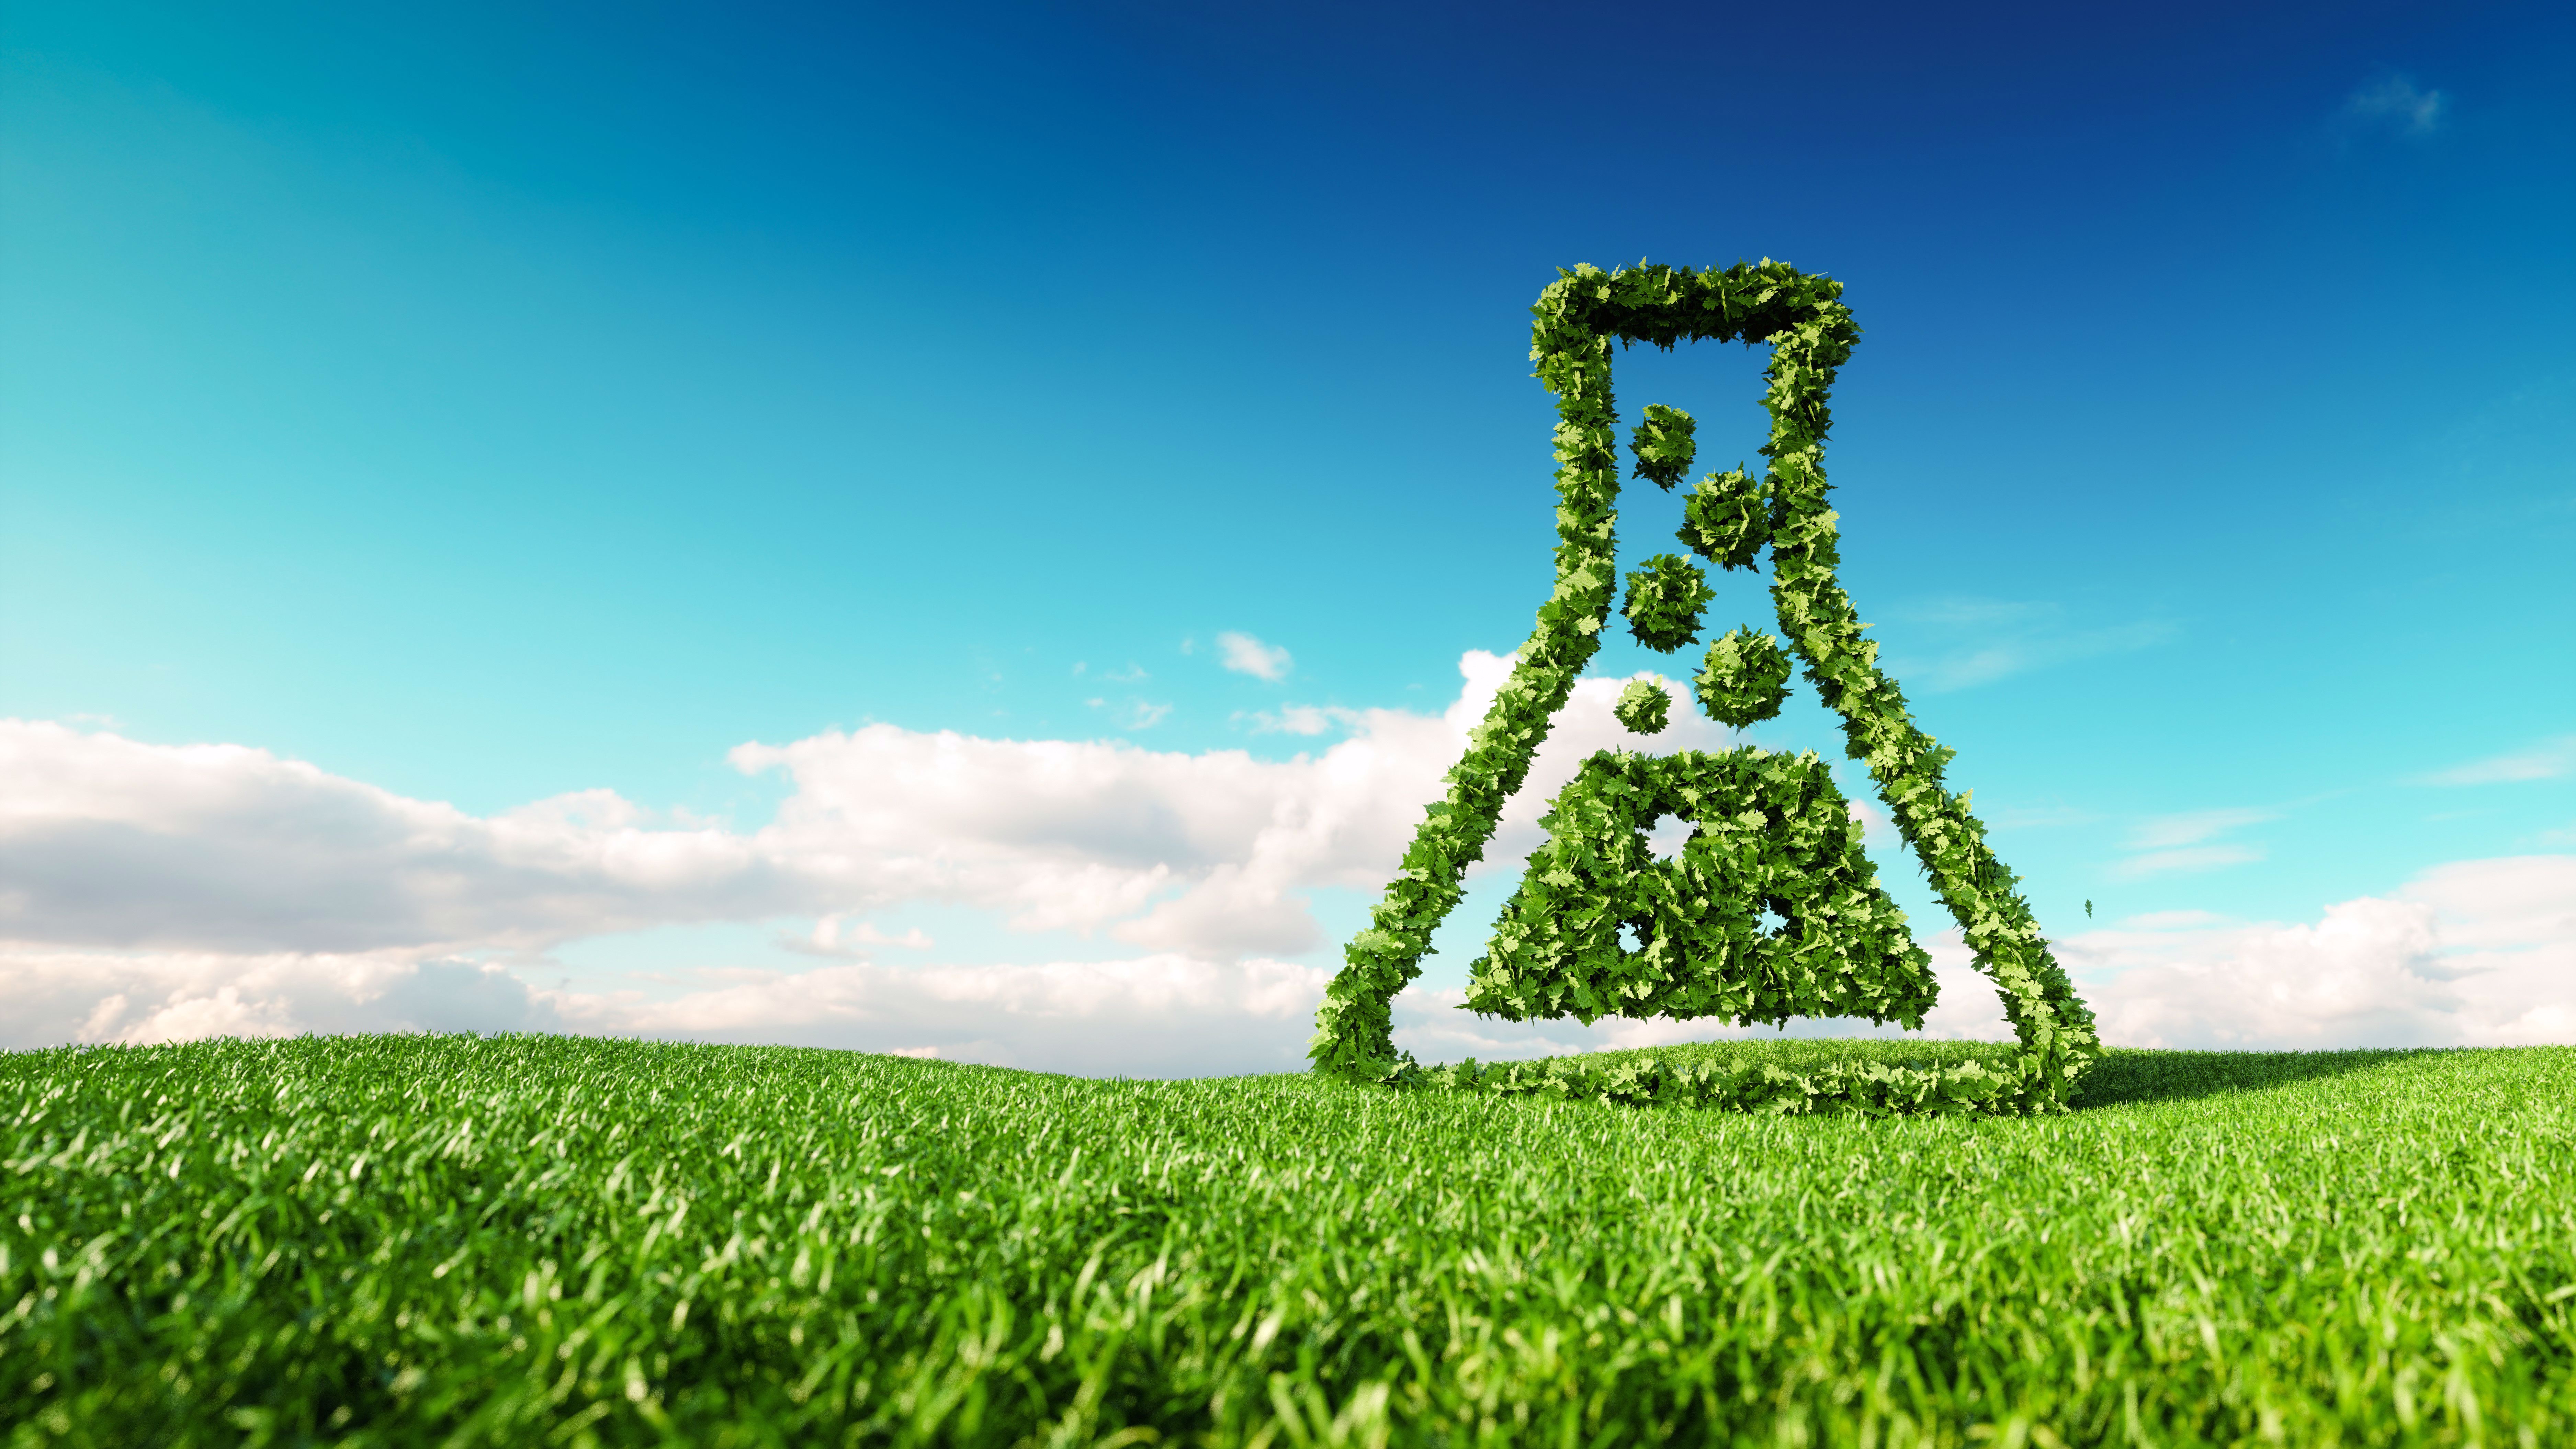 Optimism and concern over Europe’s future chemicals policies